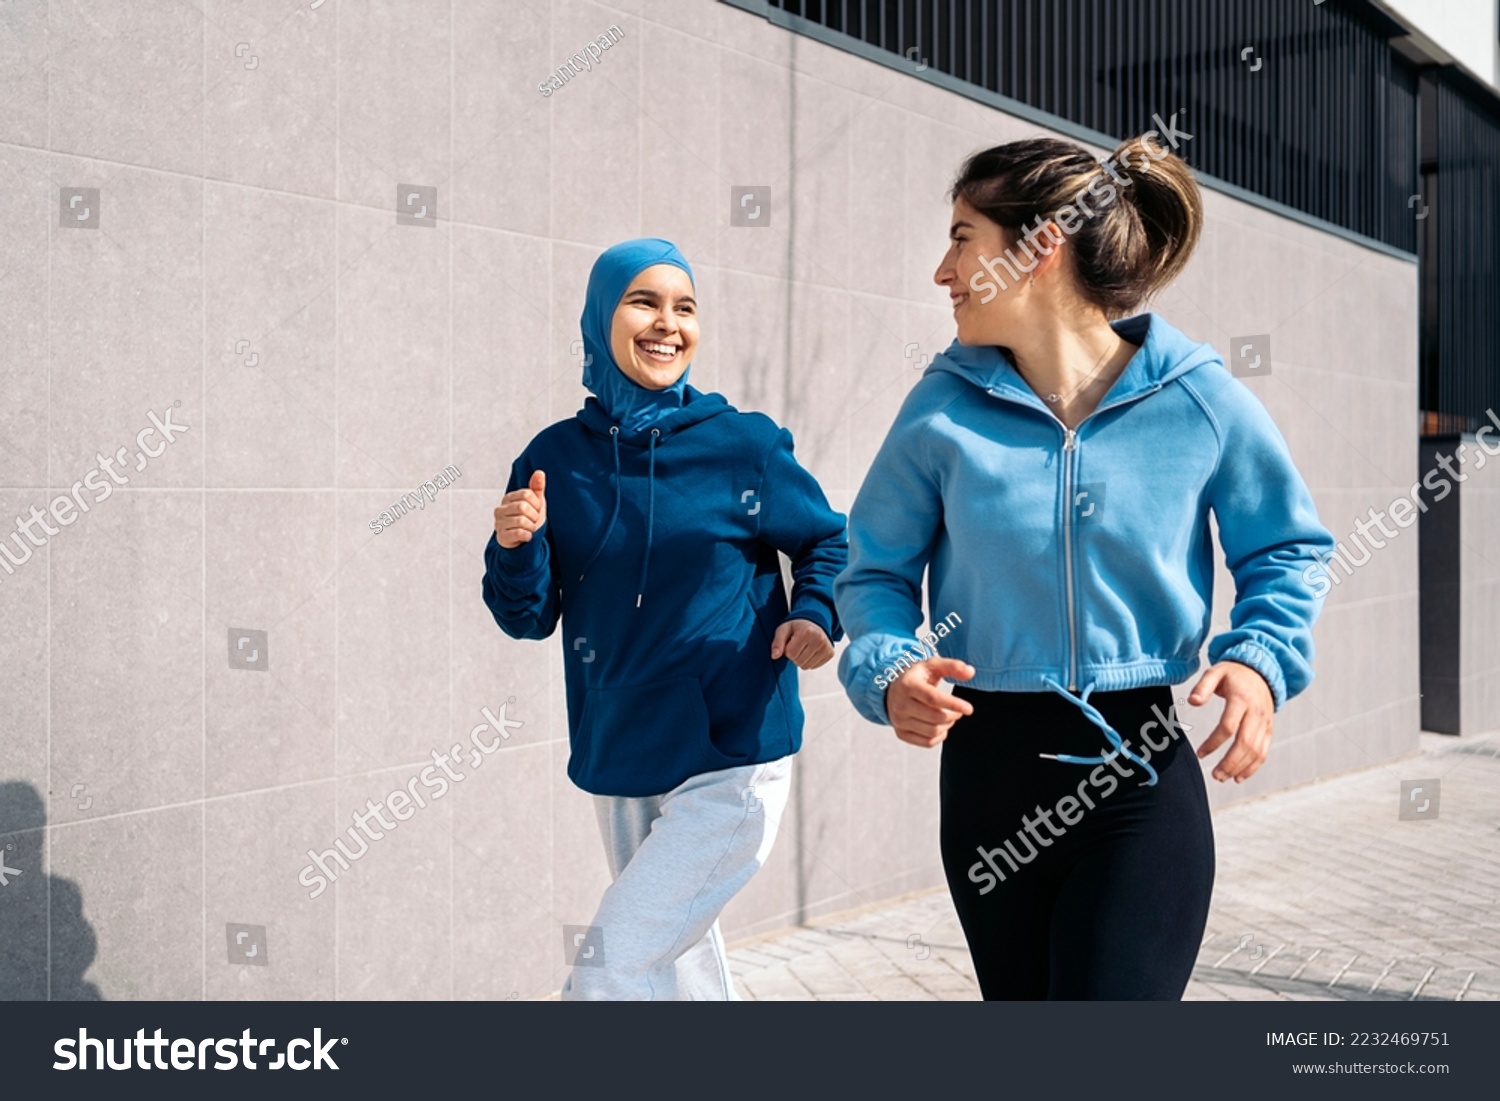 Cheerful muslim woman wearing hijab running in the street with her friend and having fun. #2232469751